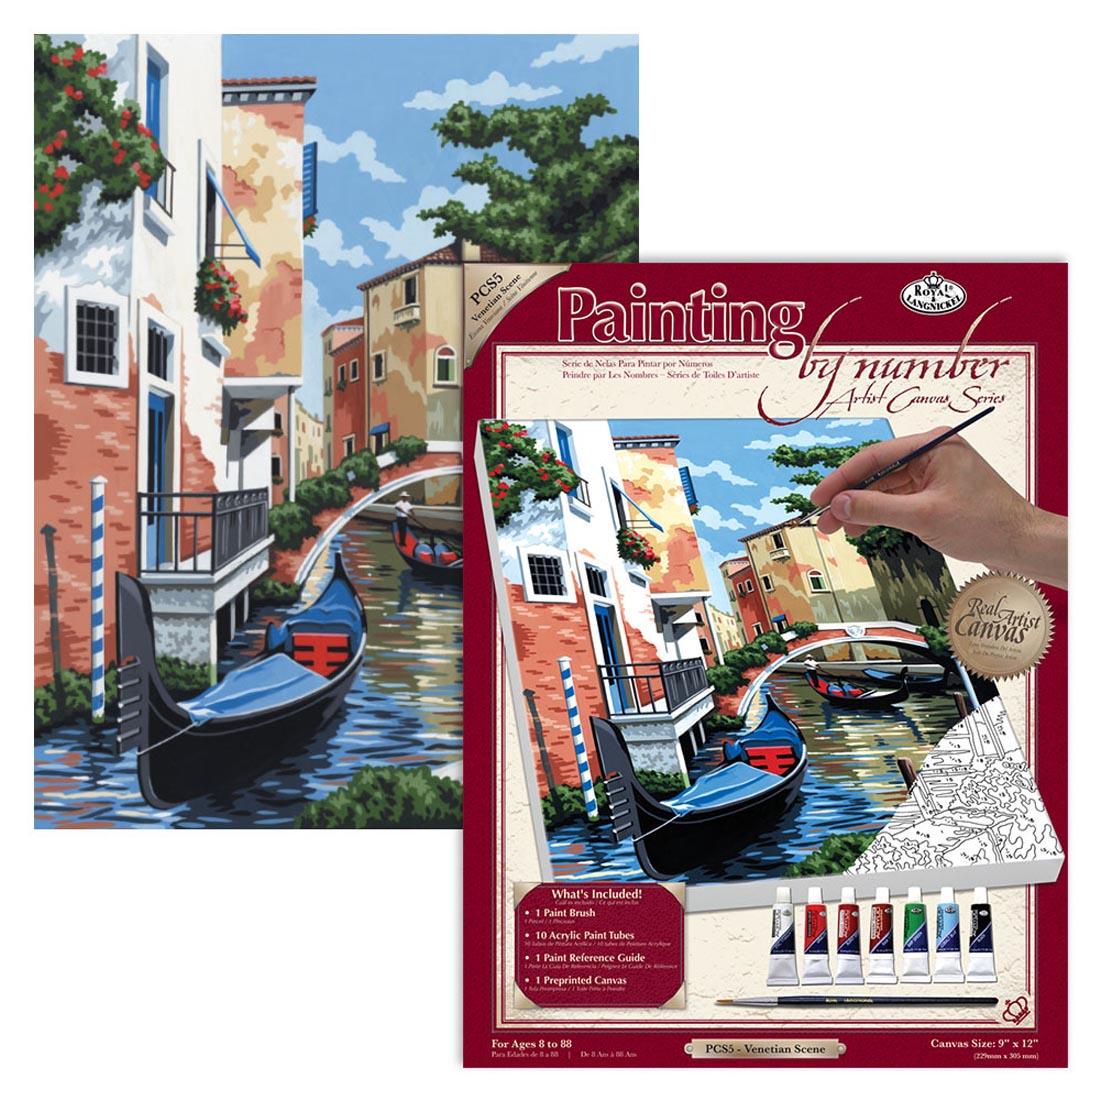 Royal & Langnickel Painting By Number Artist Canvas Series: Venetian Scene package with the completed painting behind it